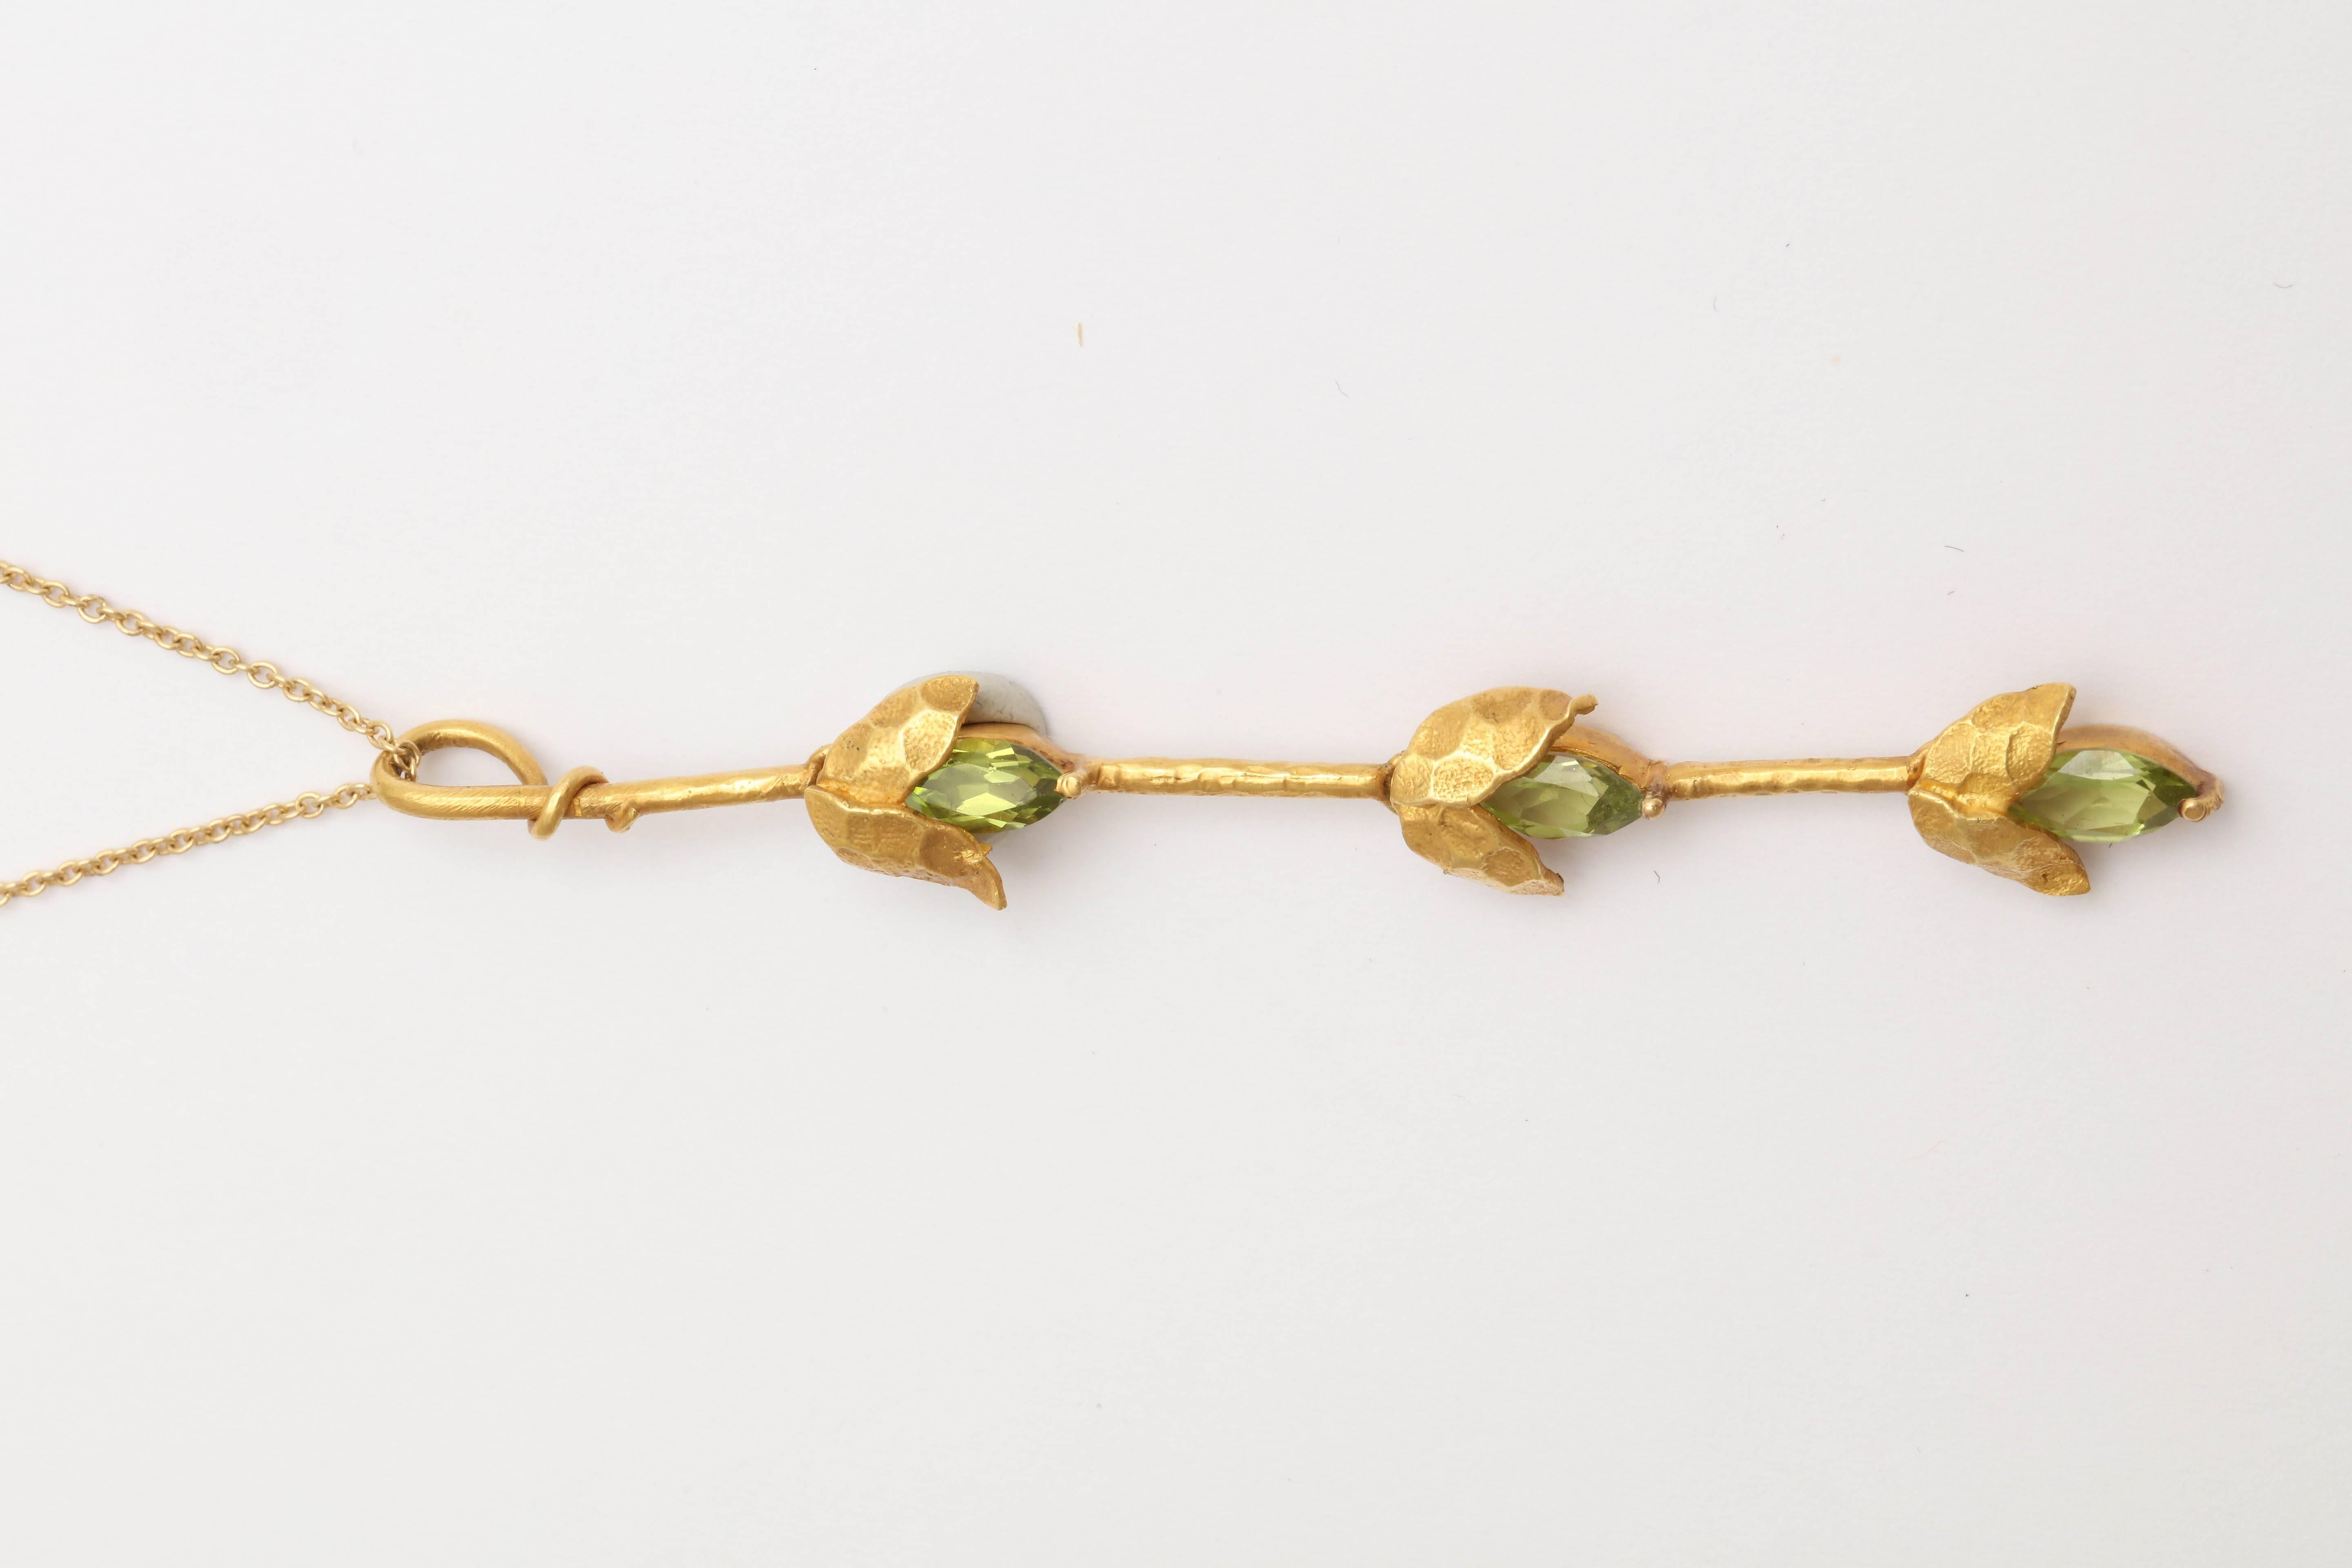 This set is made of 18 kt yellow gold in a matte hammered finish giving it an antient look. The gold leaves hold the peridot marquise and are articulated. The pendant is 3 in. long and the earrings are 2 3/4 in. long. The earrings hang from a 14 kt